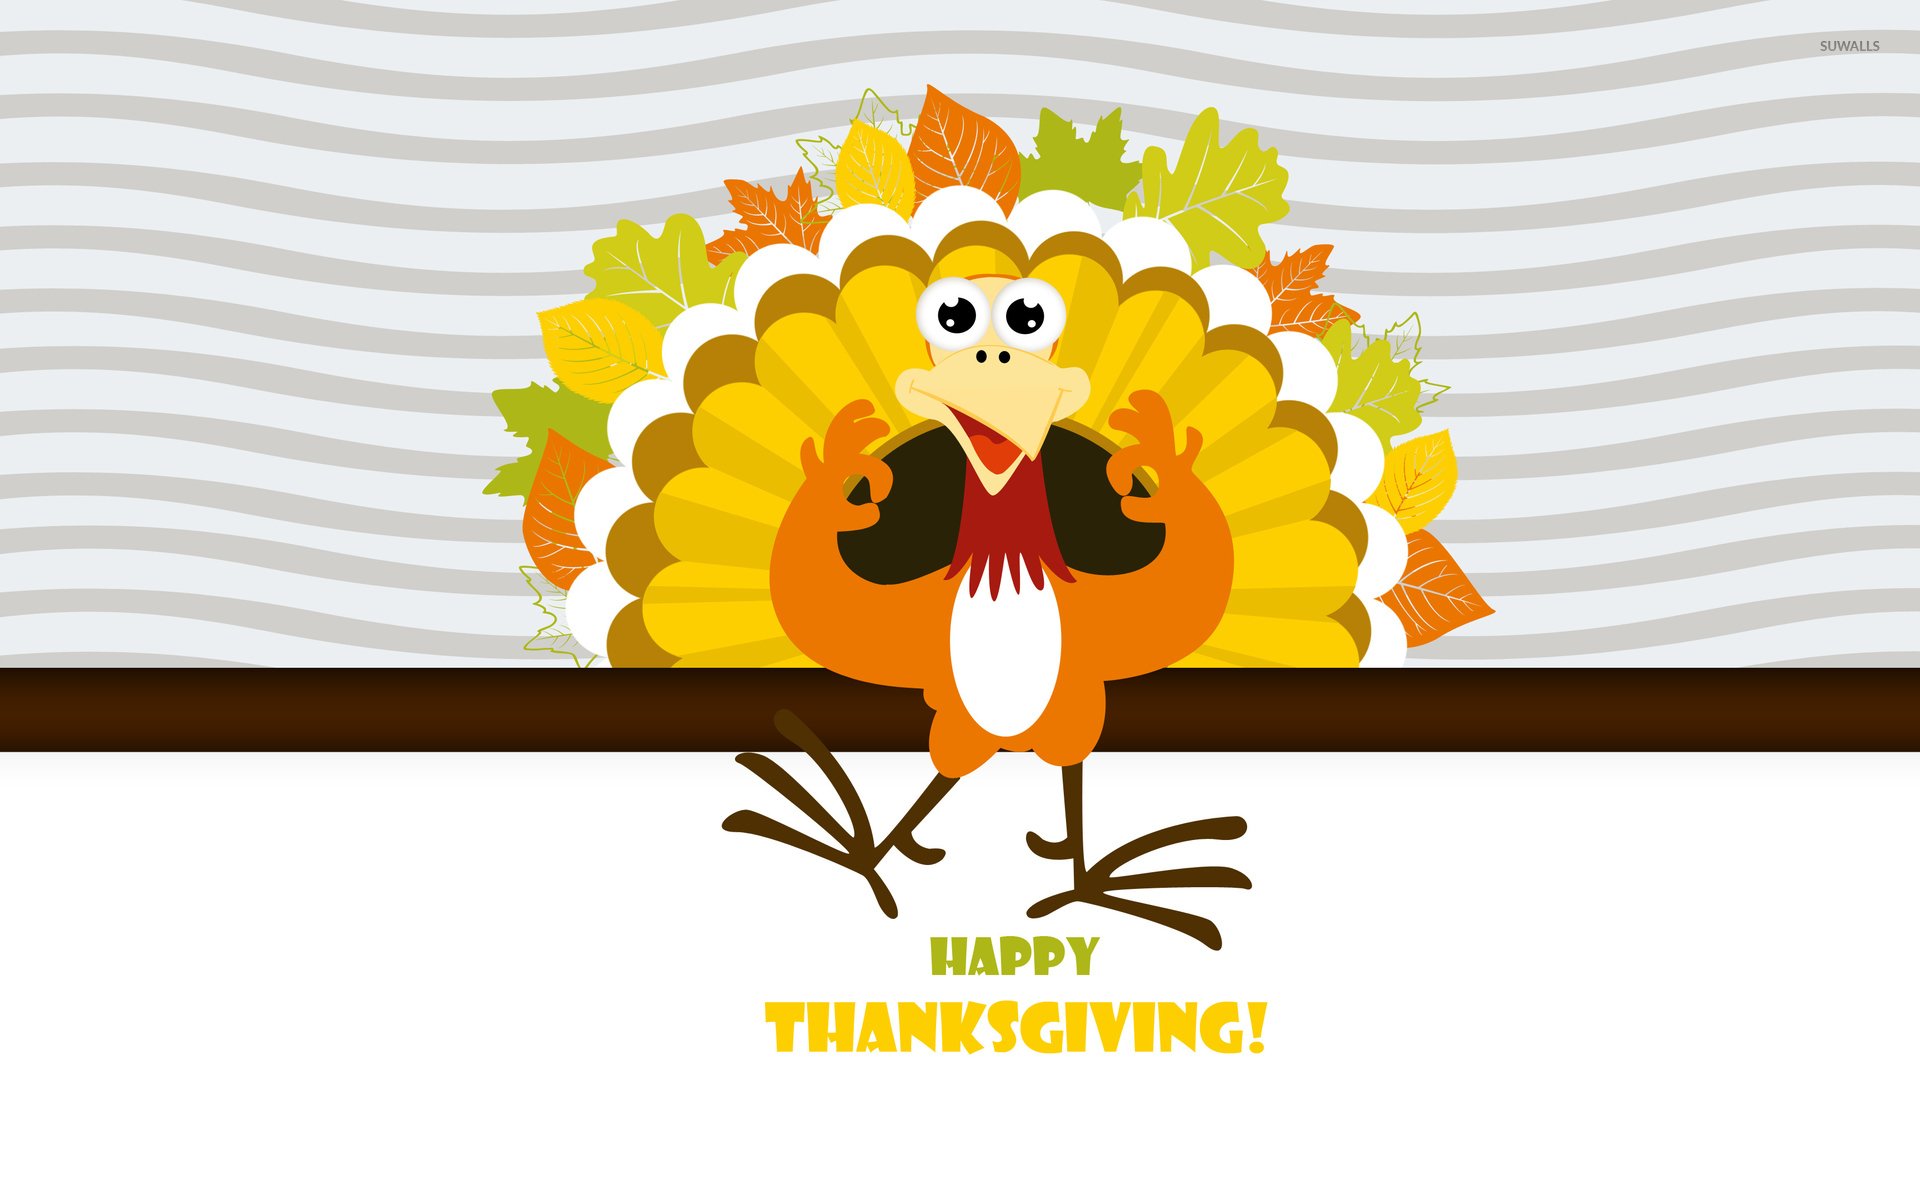 Happy Thanksgiving turkey wallpaper Holiday wallpapers